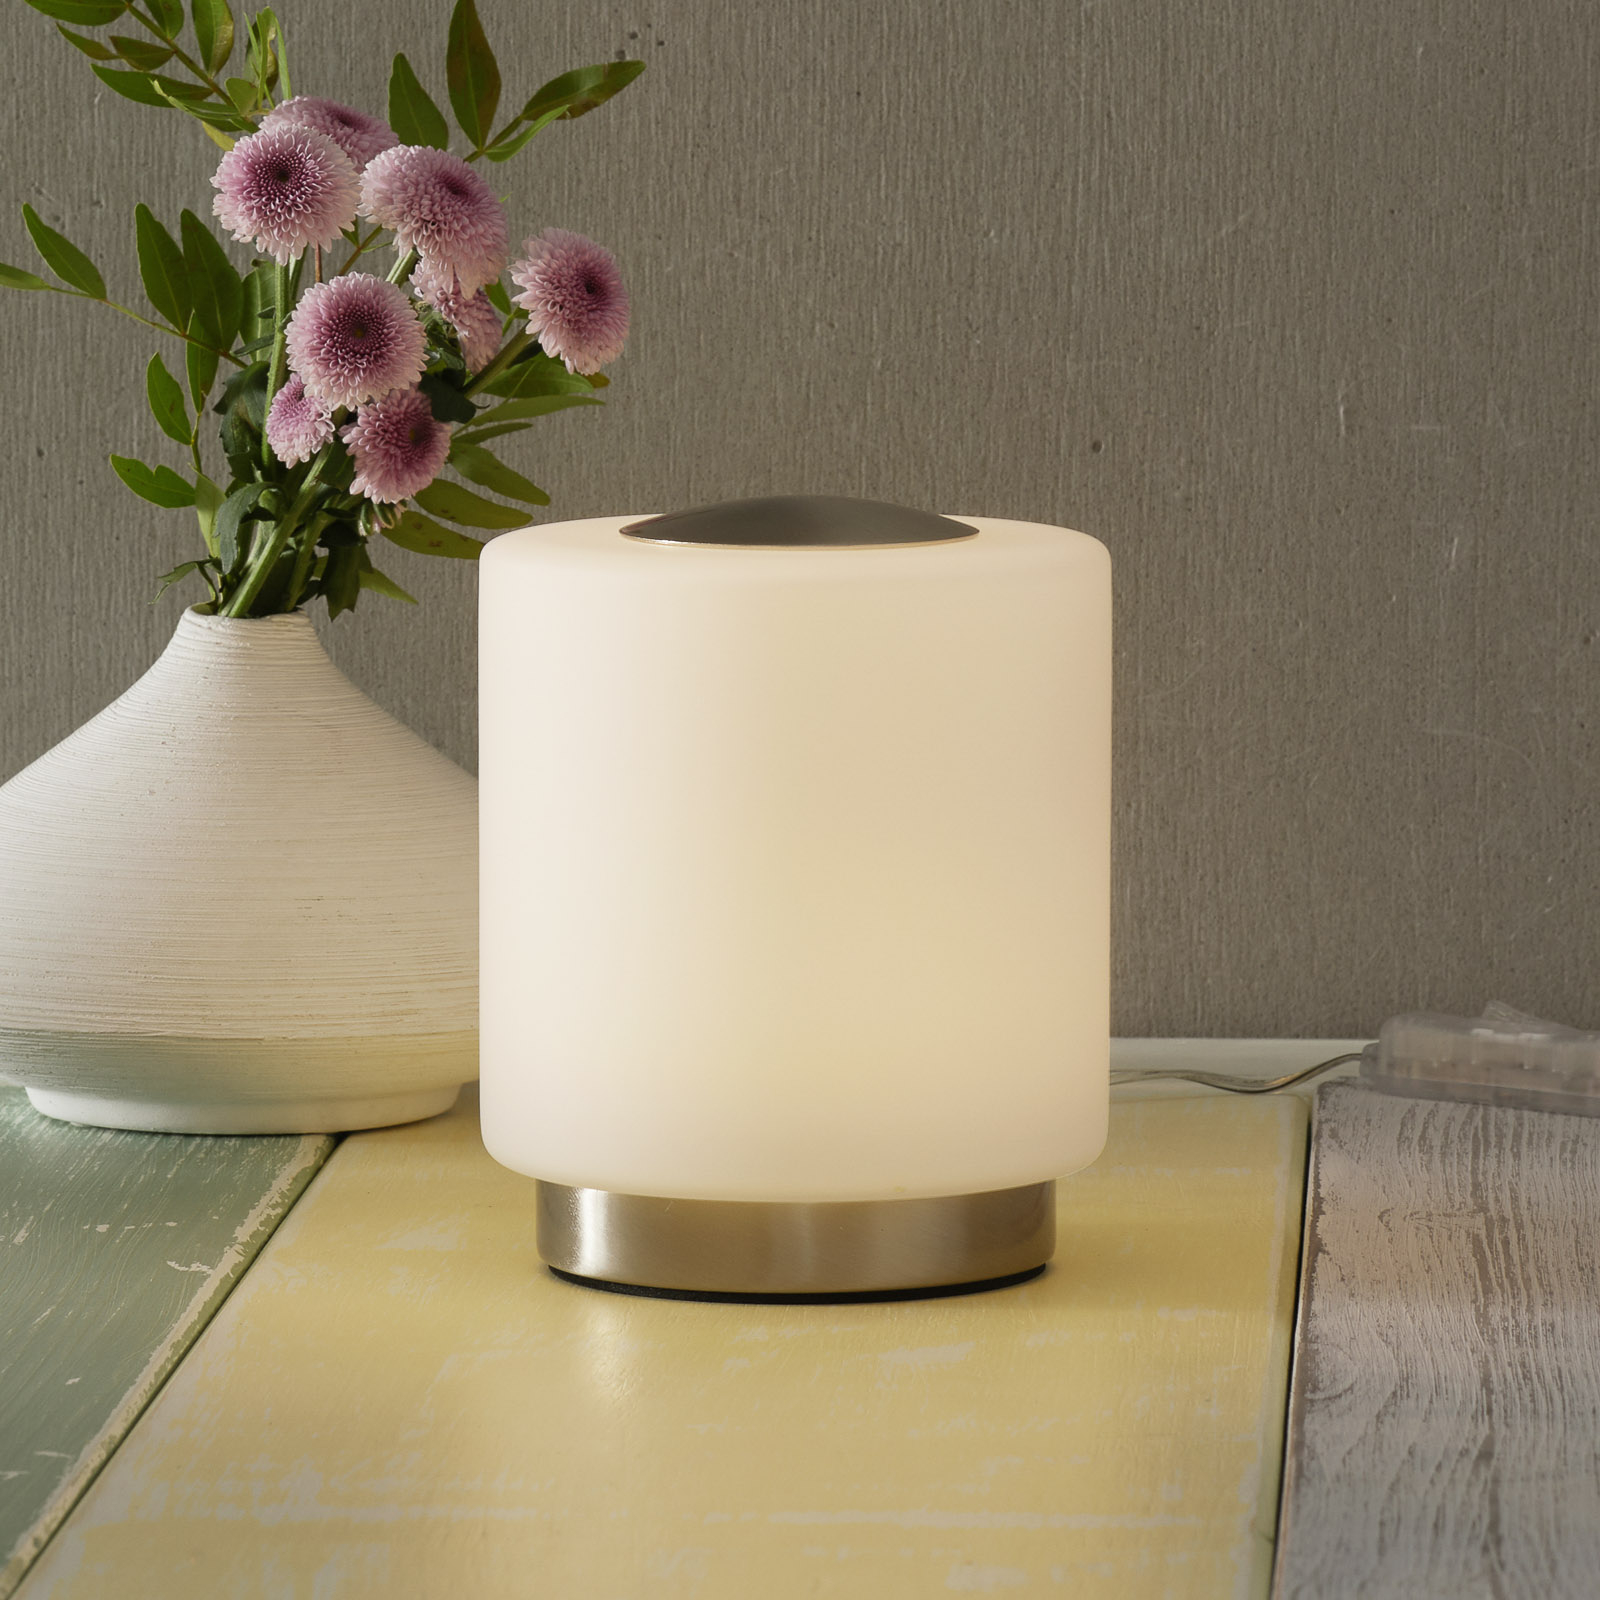 Dimmable Simi table lamp with touch function